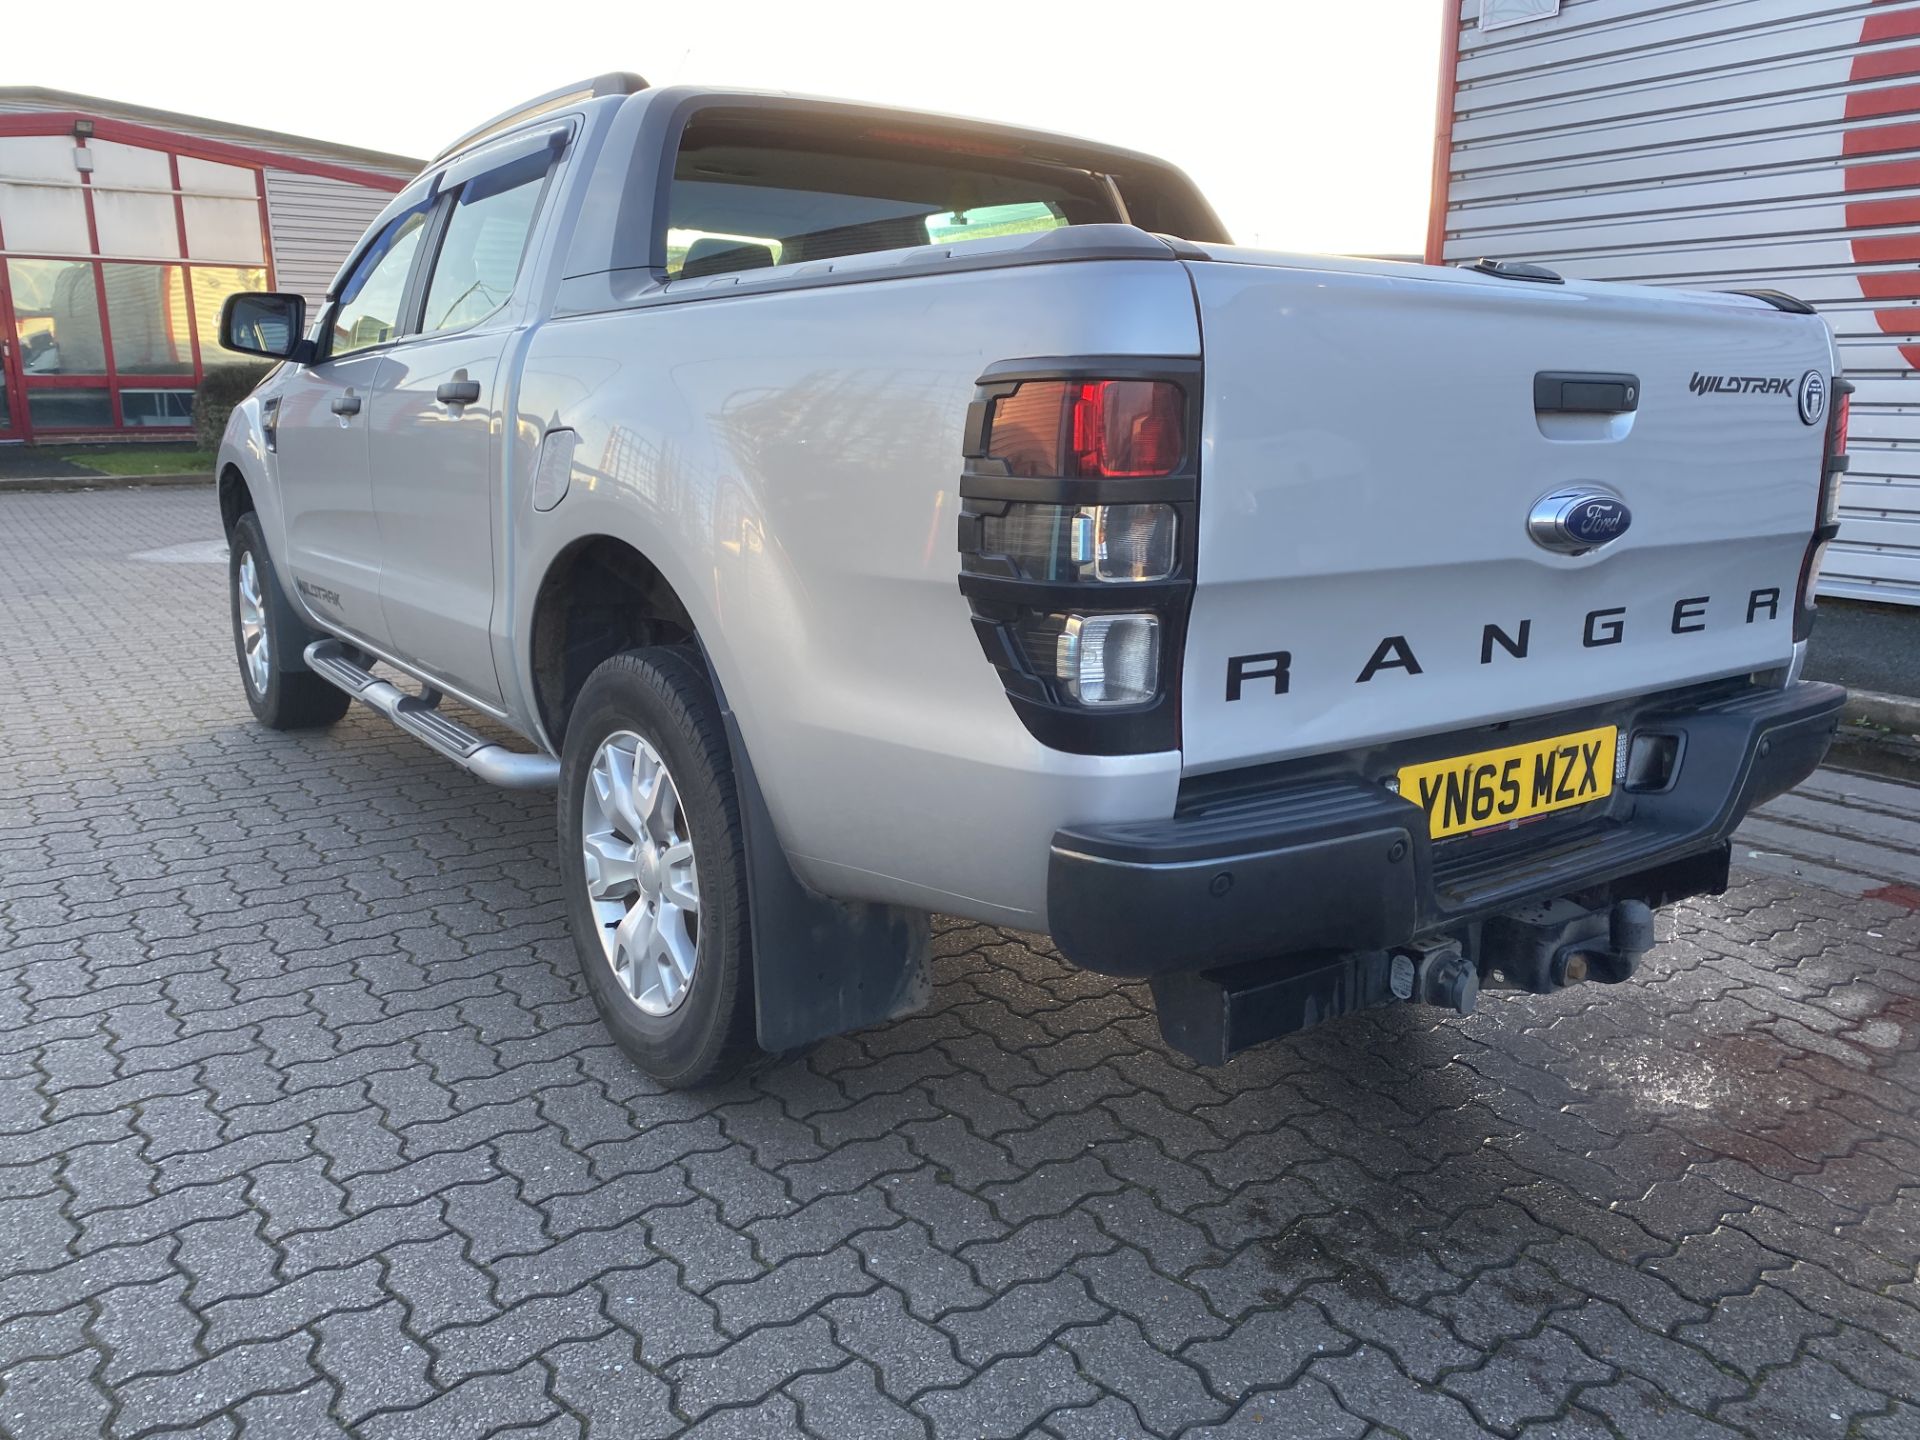 Ford Ranger Wildtrak 4 x 4 3.2 TDCI 6 Speed Automatic Double Cab Pick Up Truck, Silver - Image 8 of 30